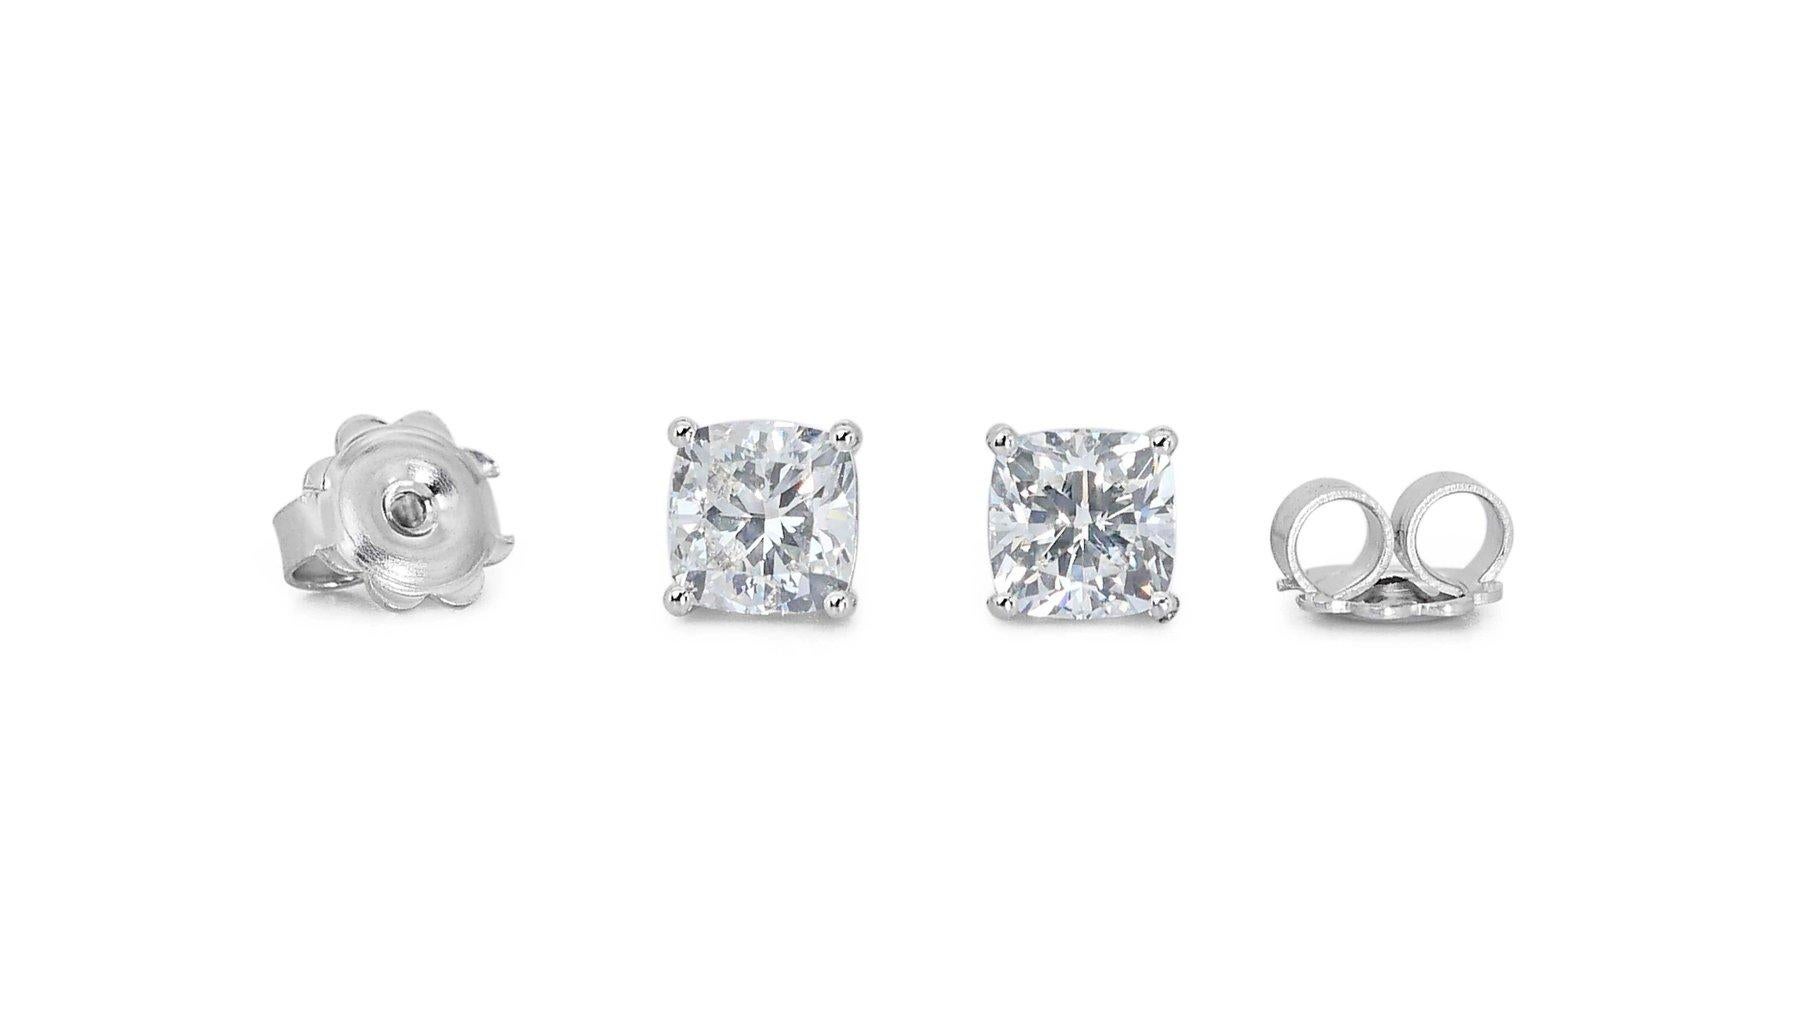 Cushion Cut Dazzling Pair of 18K White Gold Earrings with 2.06 Carat Square Diamond For Sale